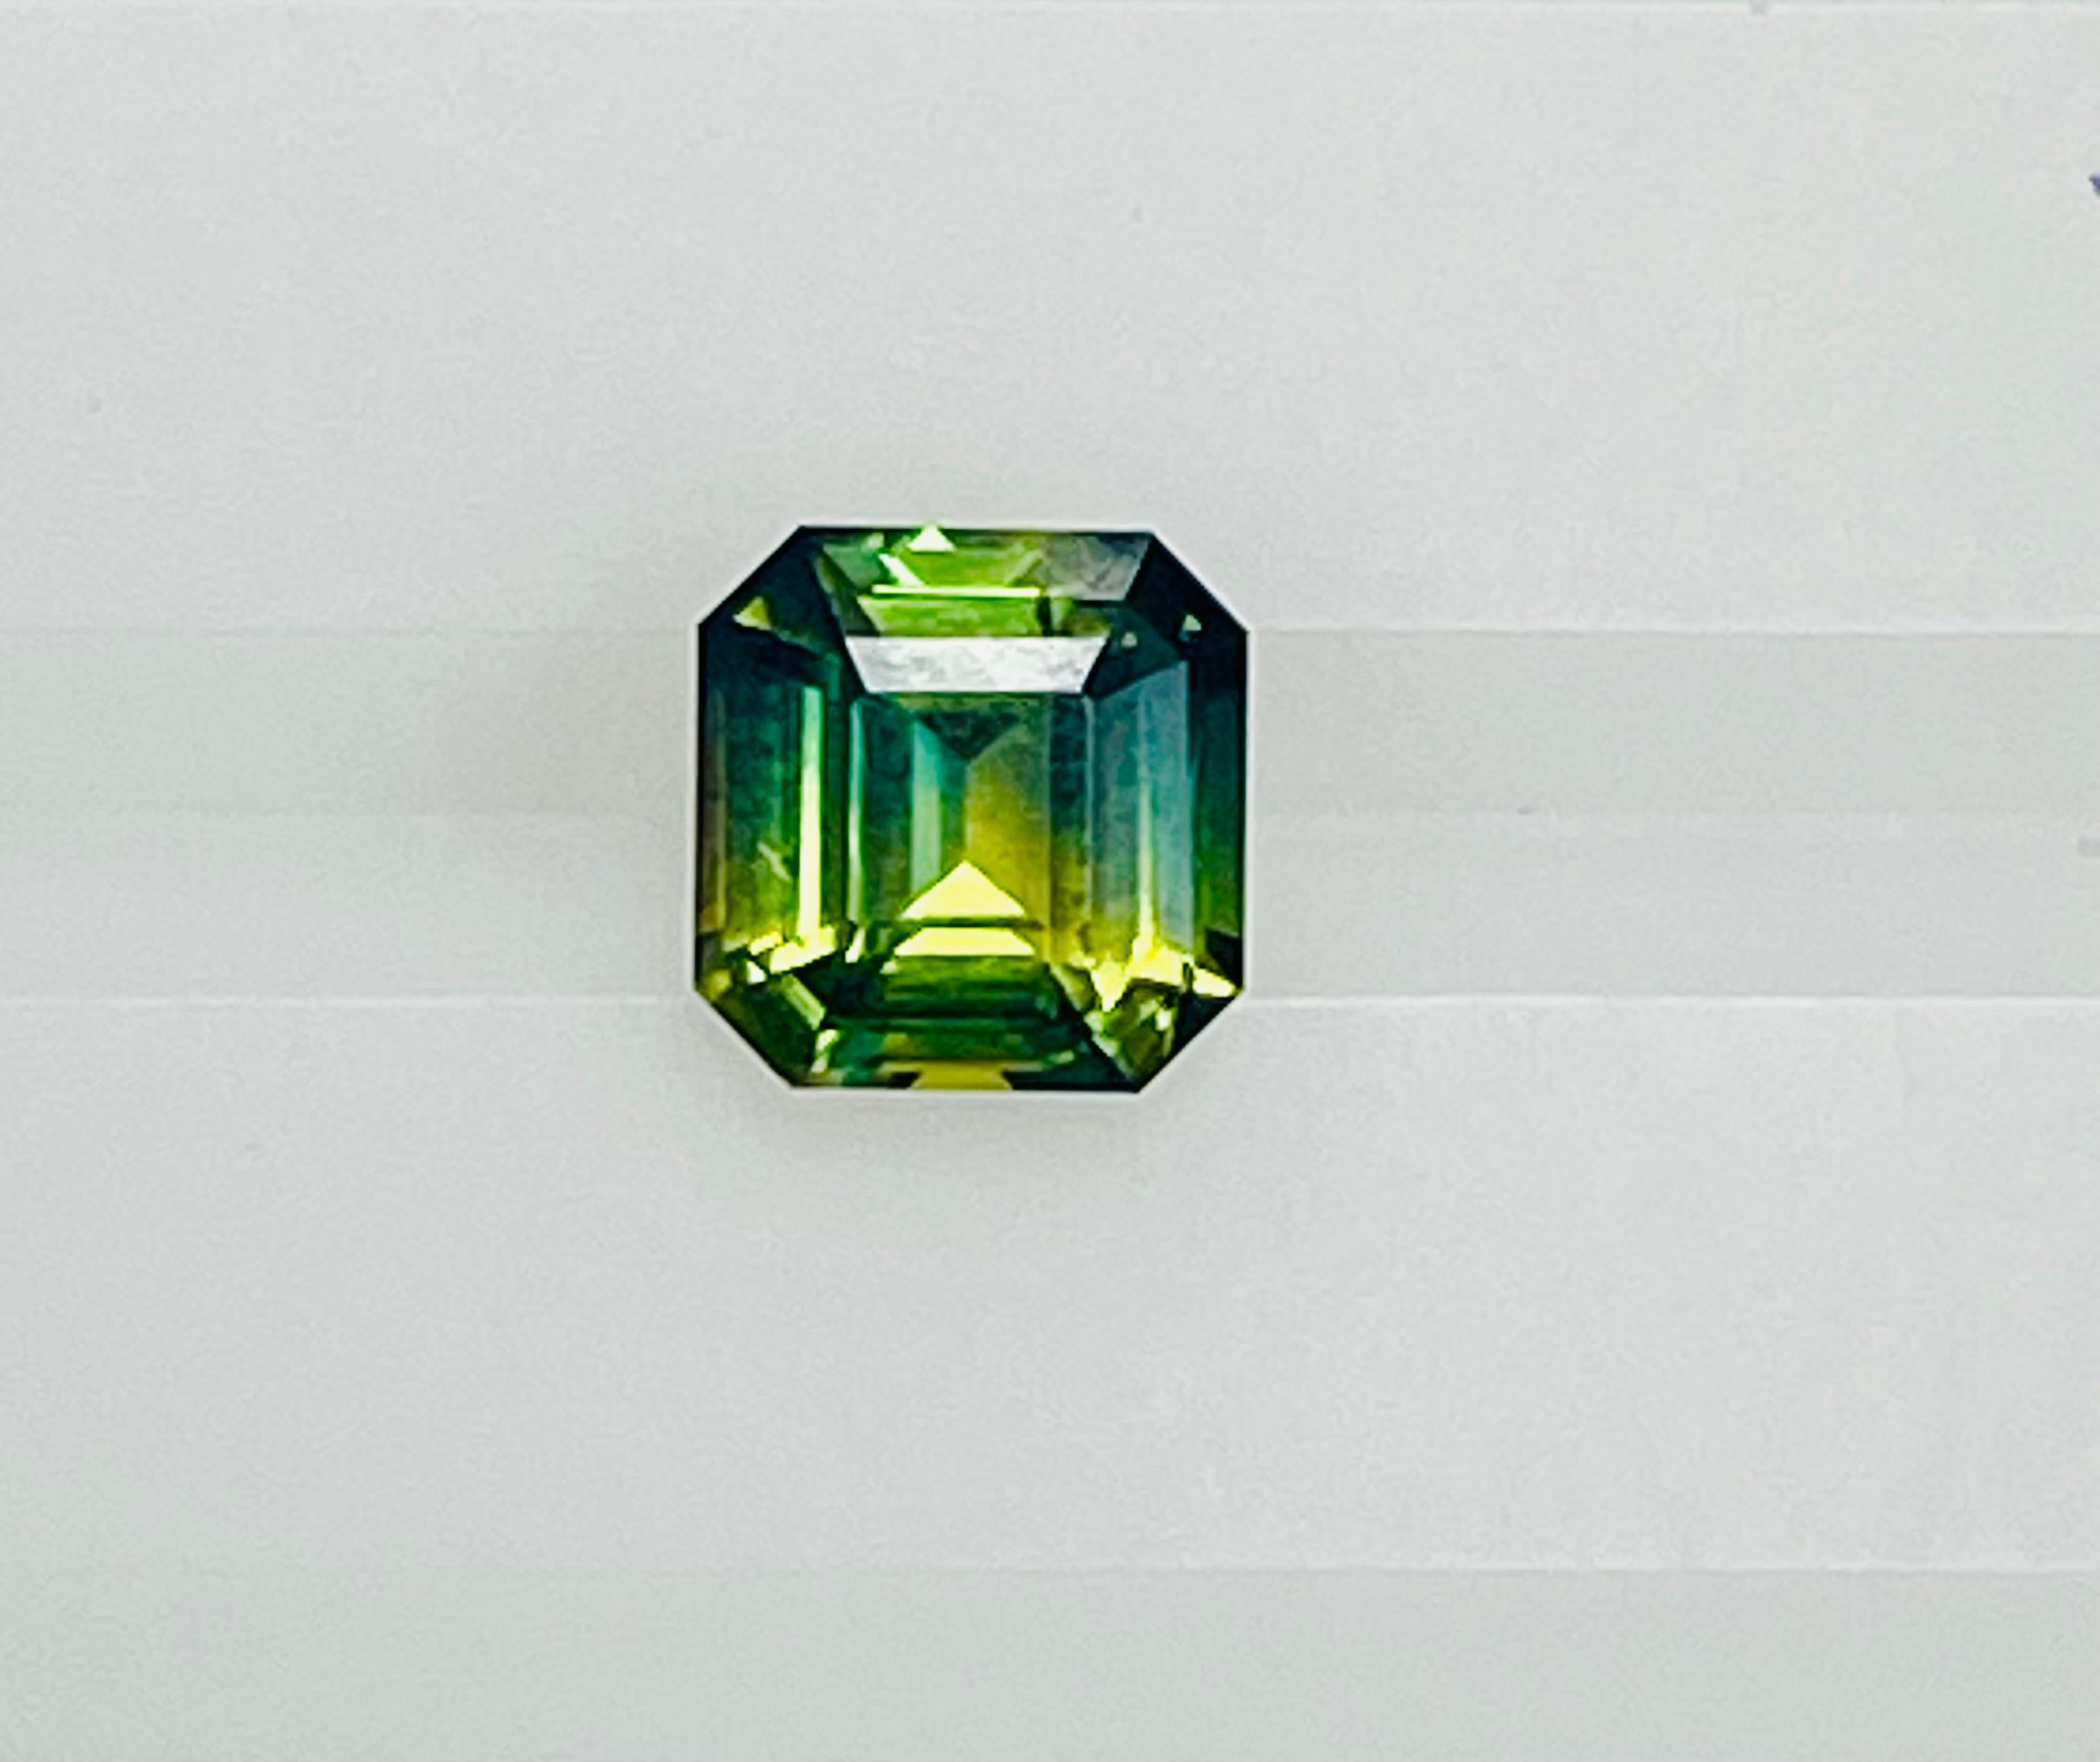 This 2.12 Ct square cut Bi color / Parti color sapphire exhibit  amazing mix of blue /green/ yellow colors in amazing colors and great shape and great luster .
One of a kind  mix of colors of sapphires in this 2.12 Ct sapphire .